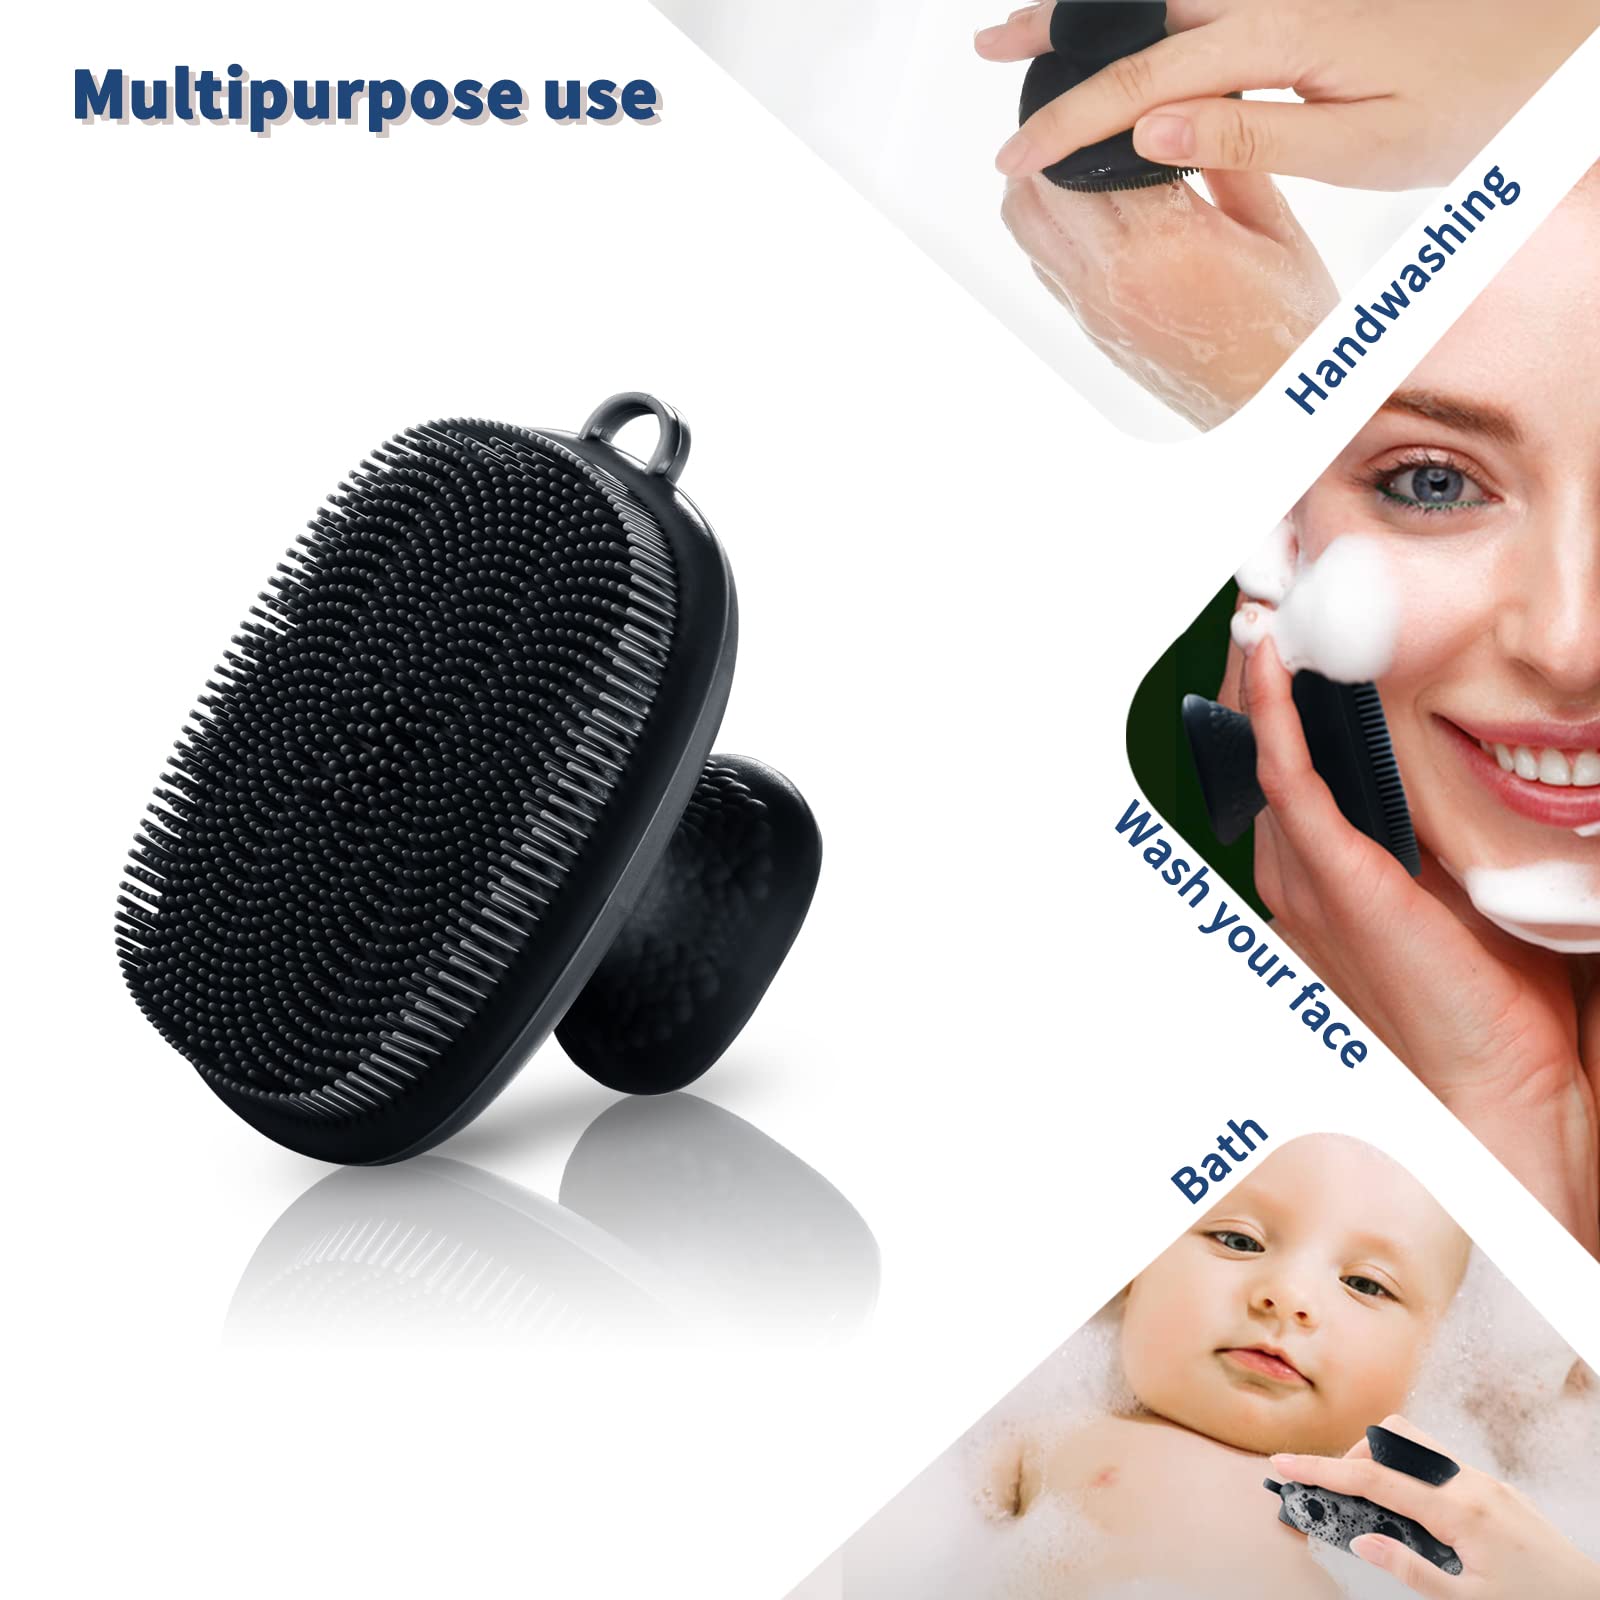 Silicone Face Scrubber for Men ,Manual Waterproof Cleansing Skin Care Face Wash Brushes for Facial Cleansing and Exfoliating (Black)